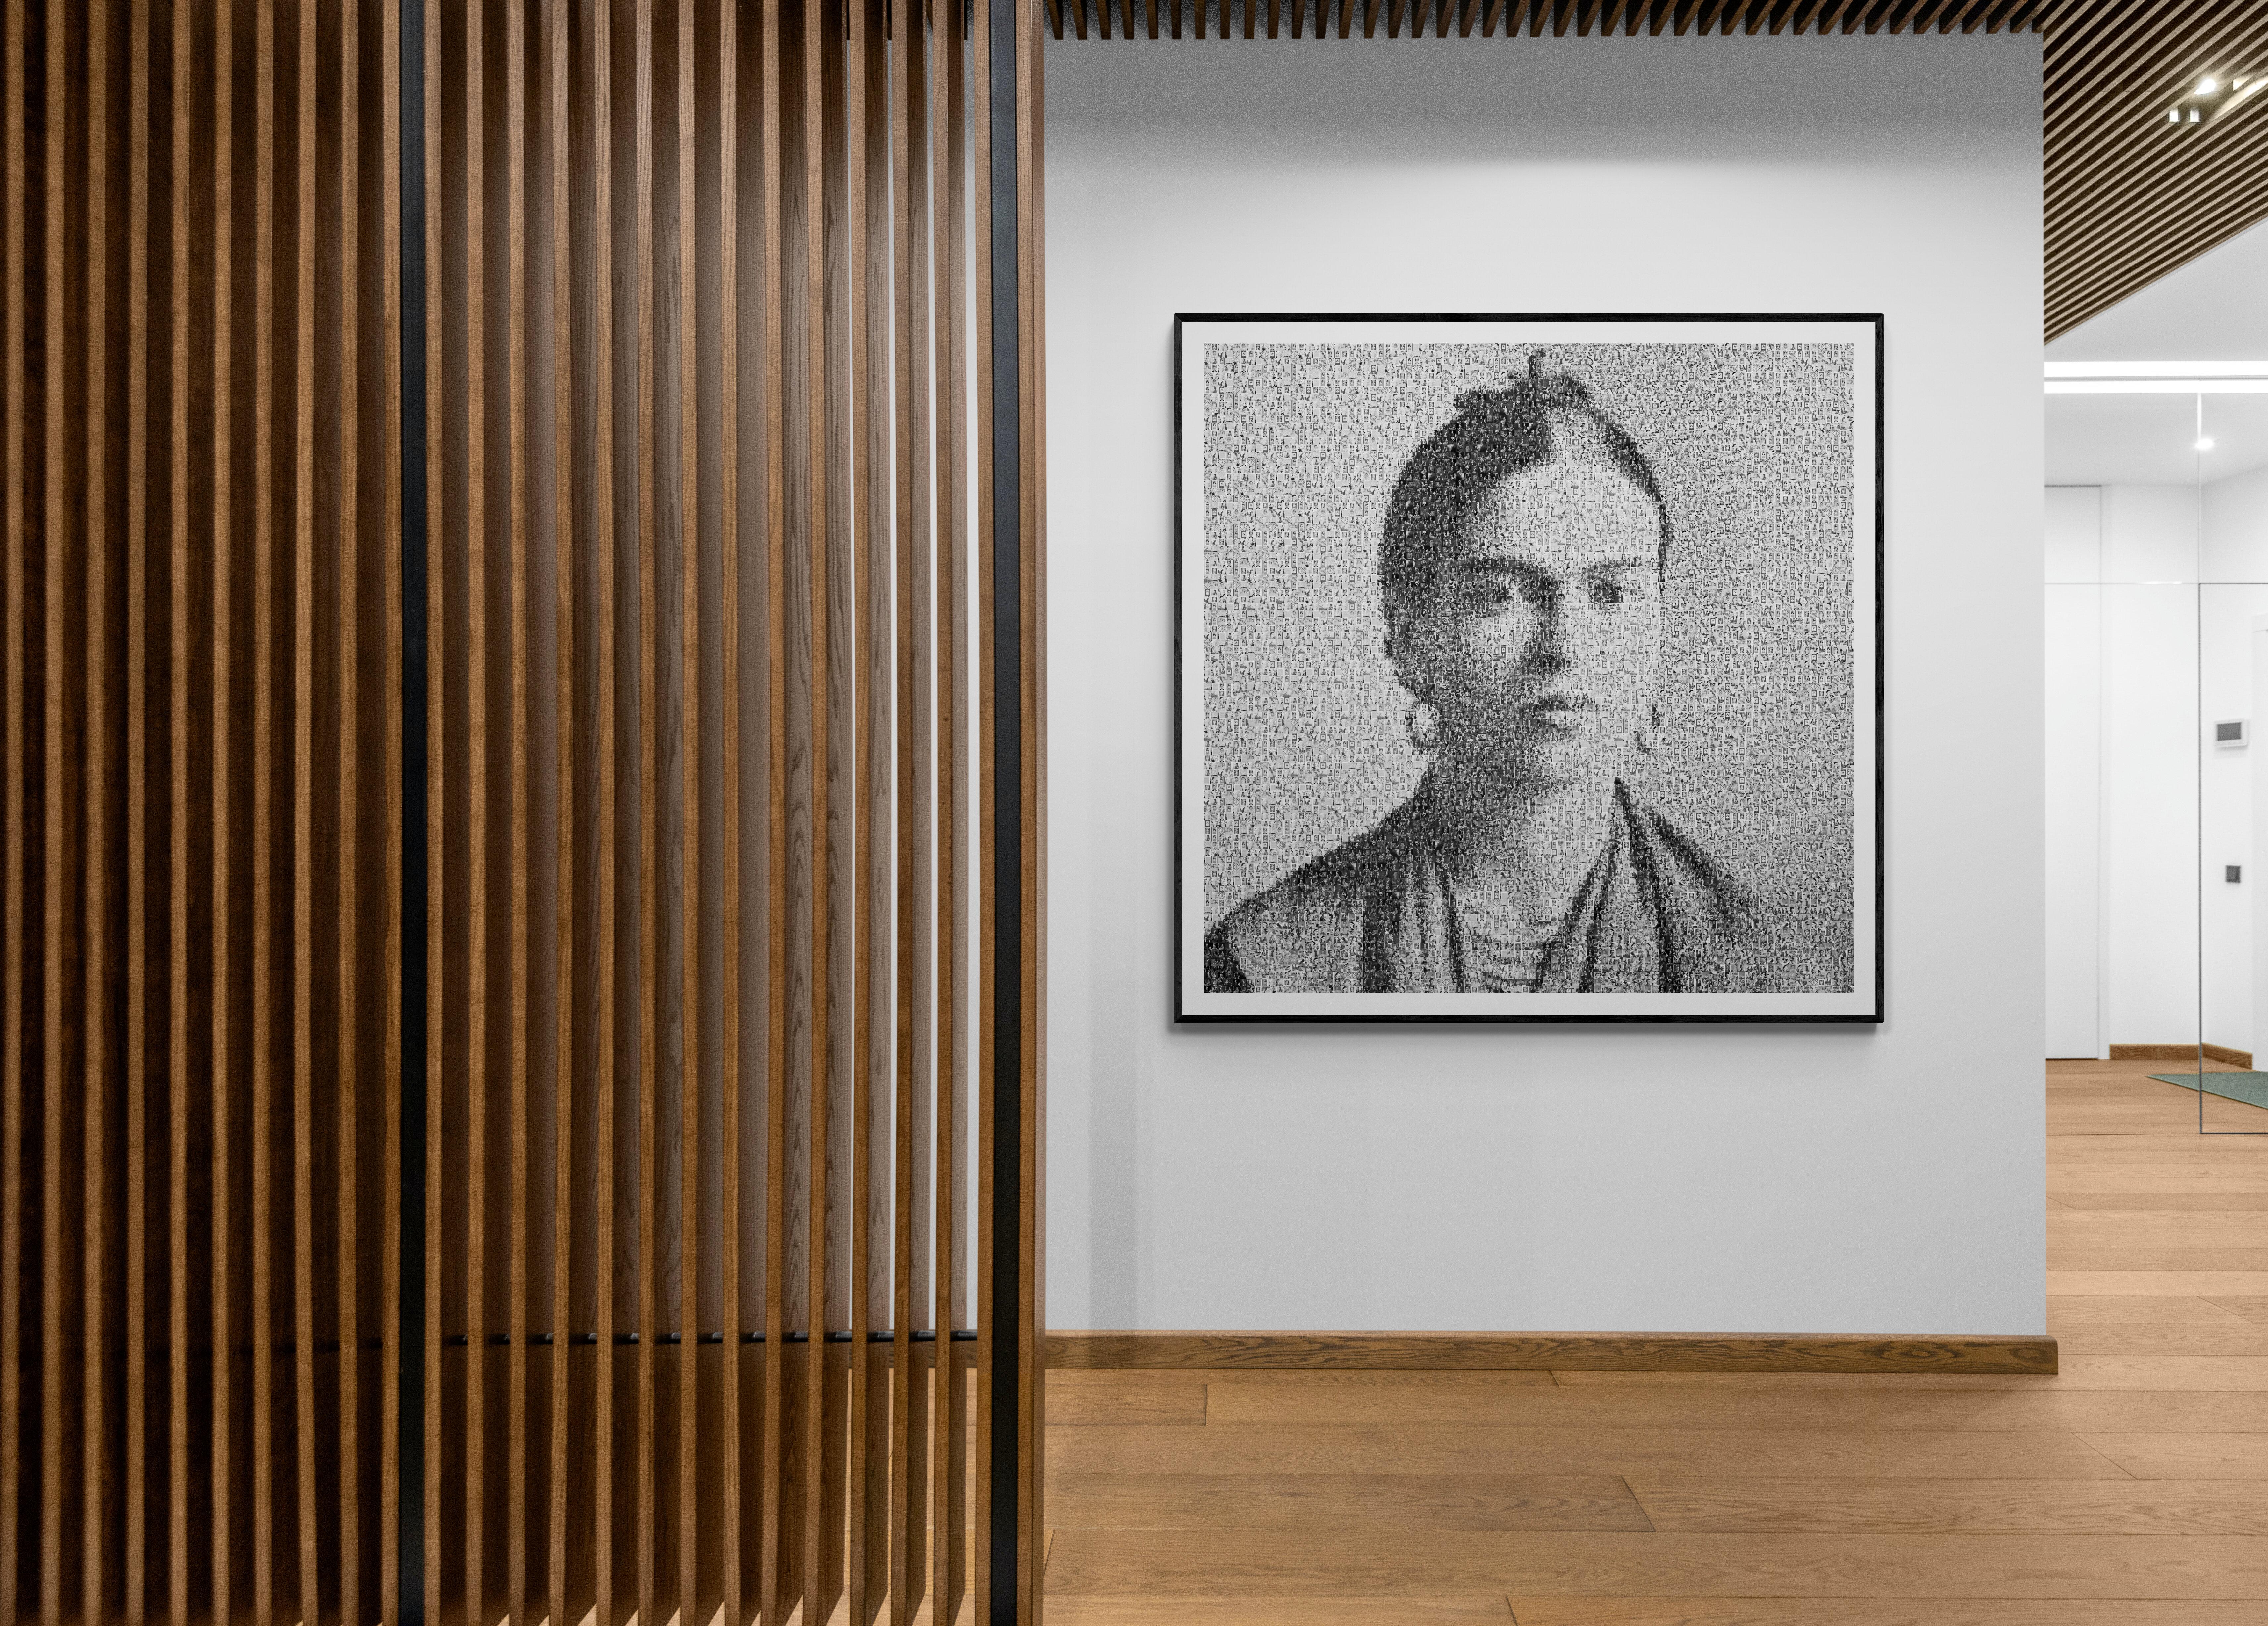 
Frida i is a photomosaic artwork by Destro. The first release in a series mosaic works called 